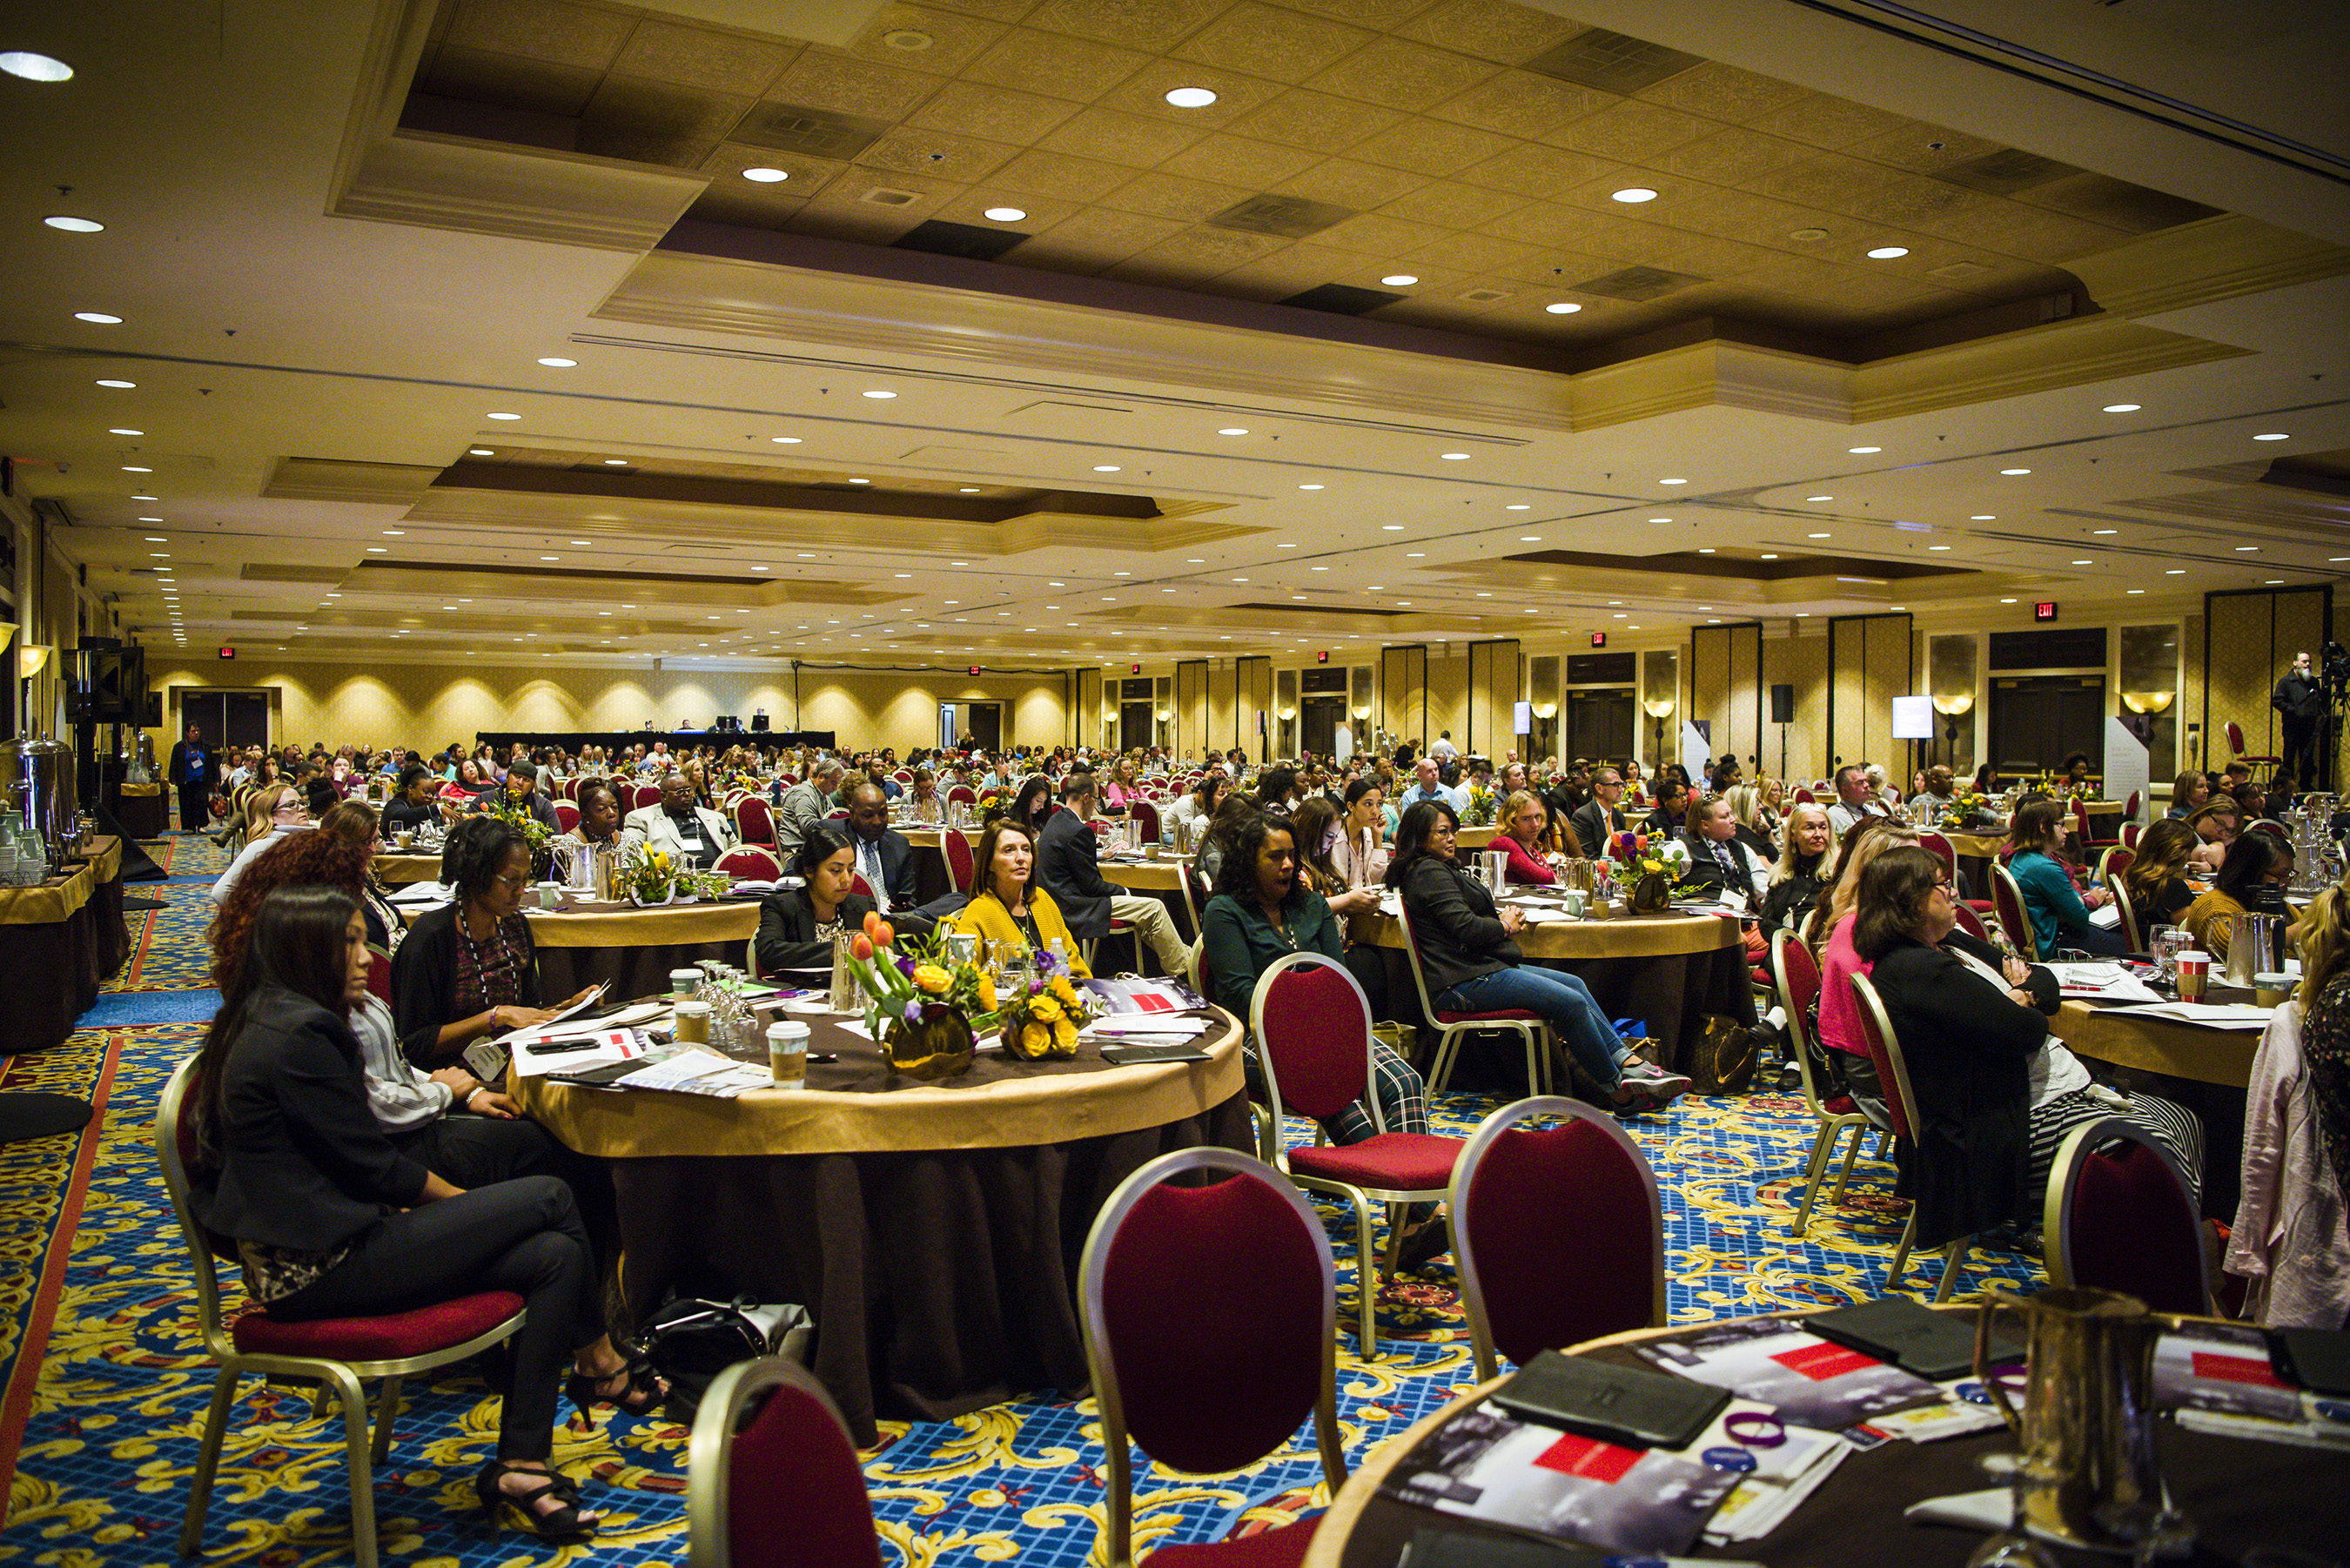 Hundreds of attendees gathered in Las Vegas at The Venetian Resort on Friday, November 2, 2018 for the unveiling of the first-ever Southern Nevada Plan to End Youth Homelessness. The Plan was announced at the Southern Nevada Youth Homelessness Summit hosted by Las Vegas Sands and the Nevada Partnership for Homeless Youth.